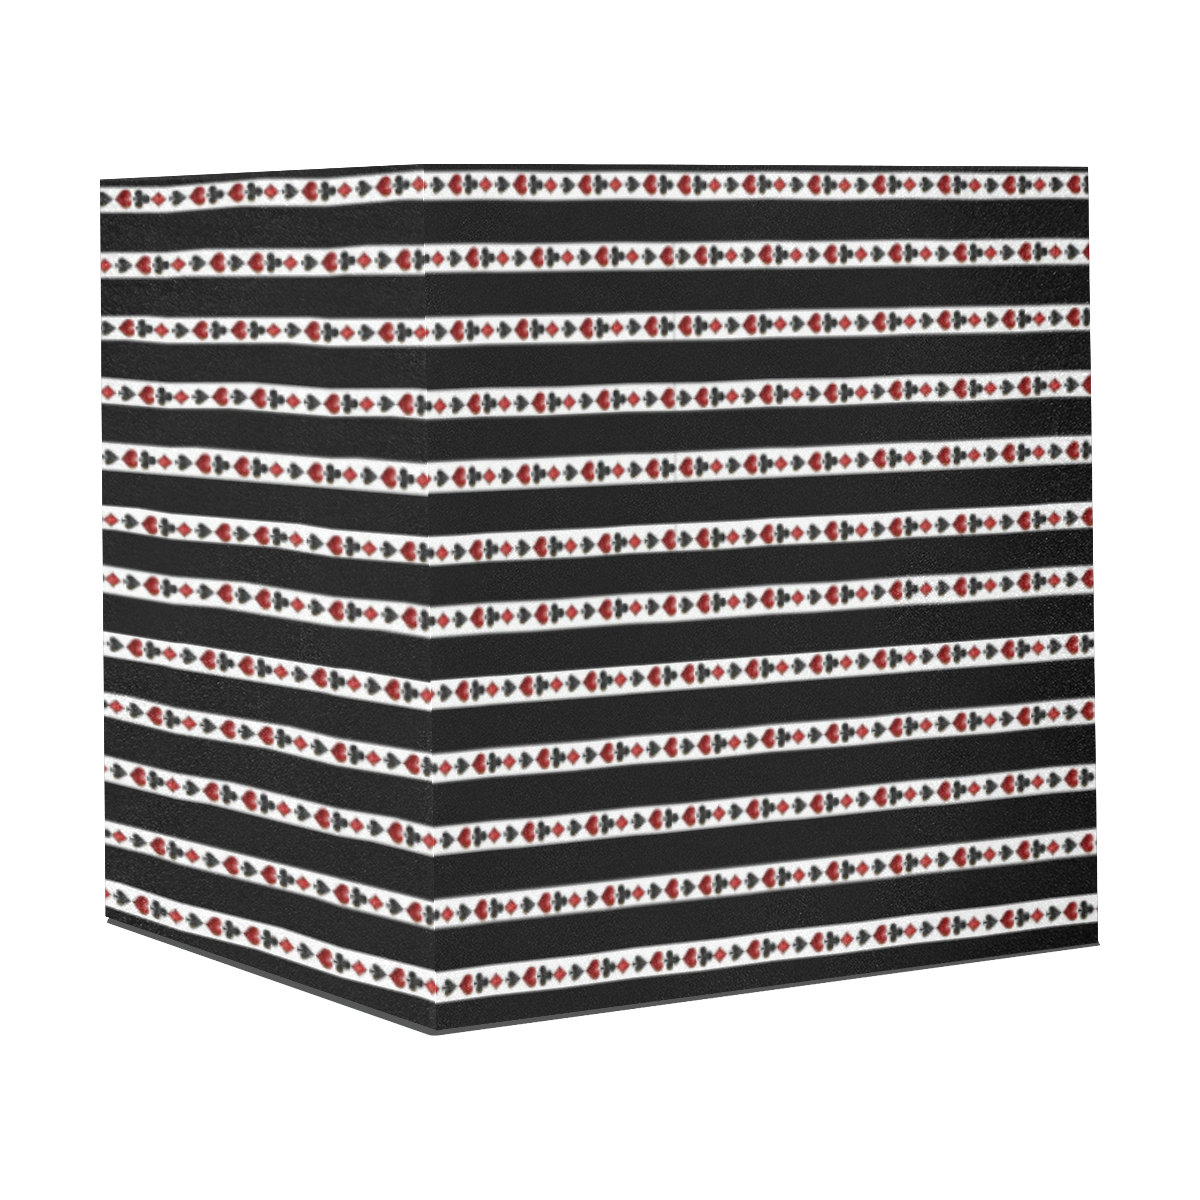 Las Vegas Playing Card Symbols Stripes Gift Wrapping Paper 58"x 23" (3 Rolls)